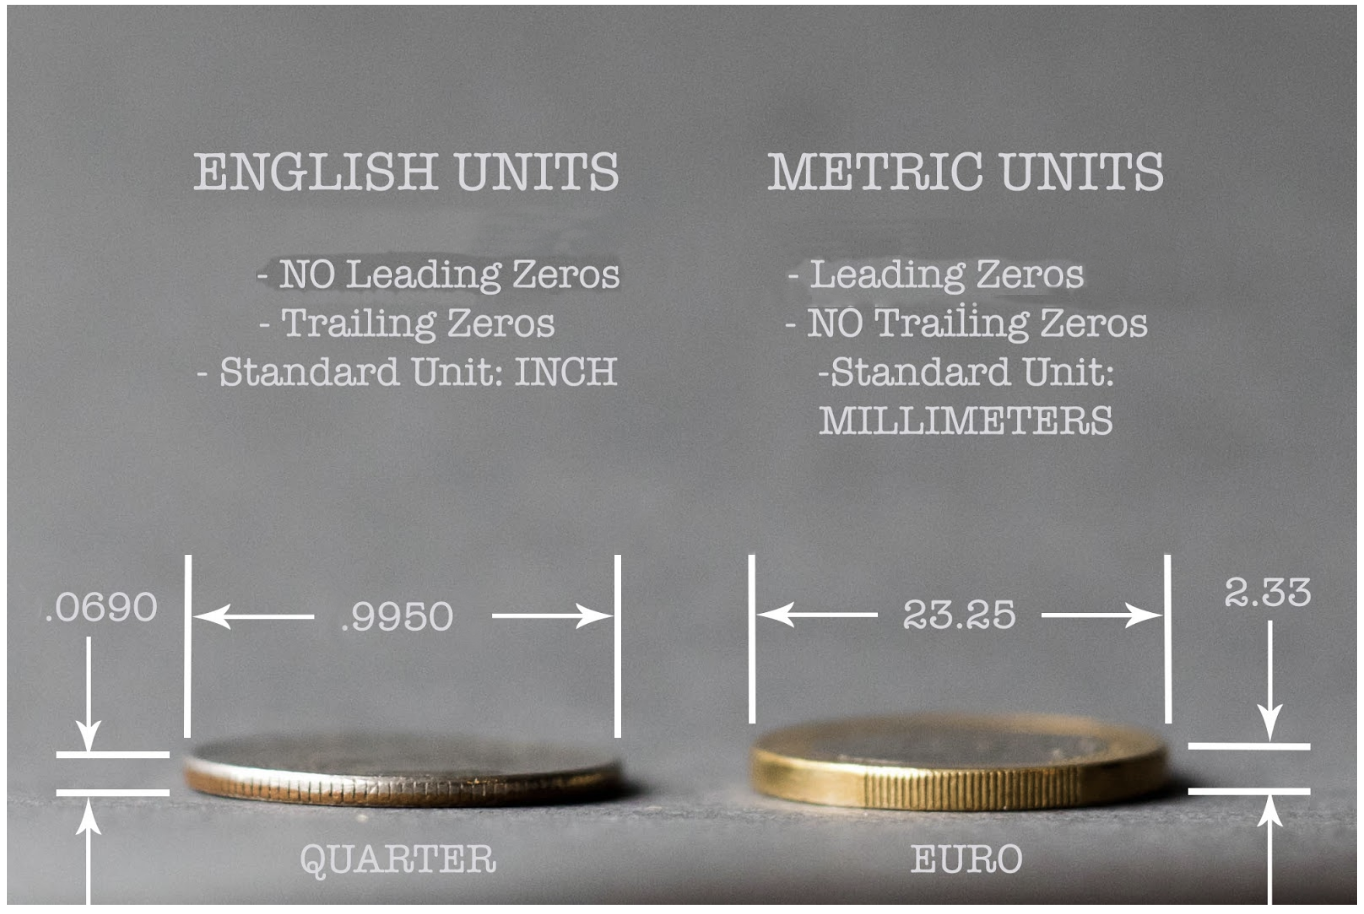 A quarter and euro coin dimensioned with English and Metric units